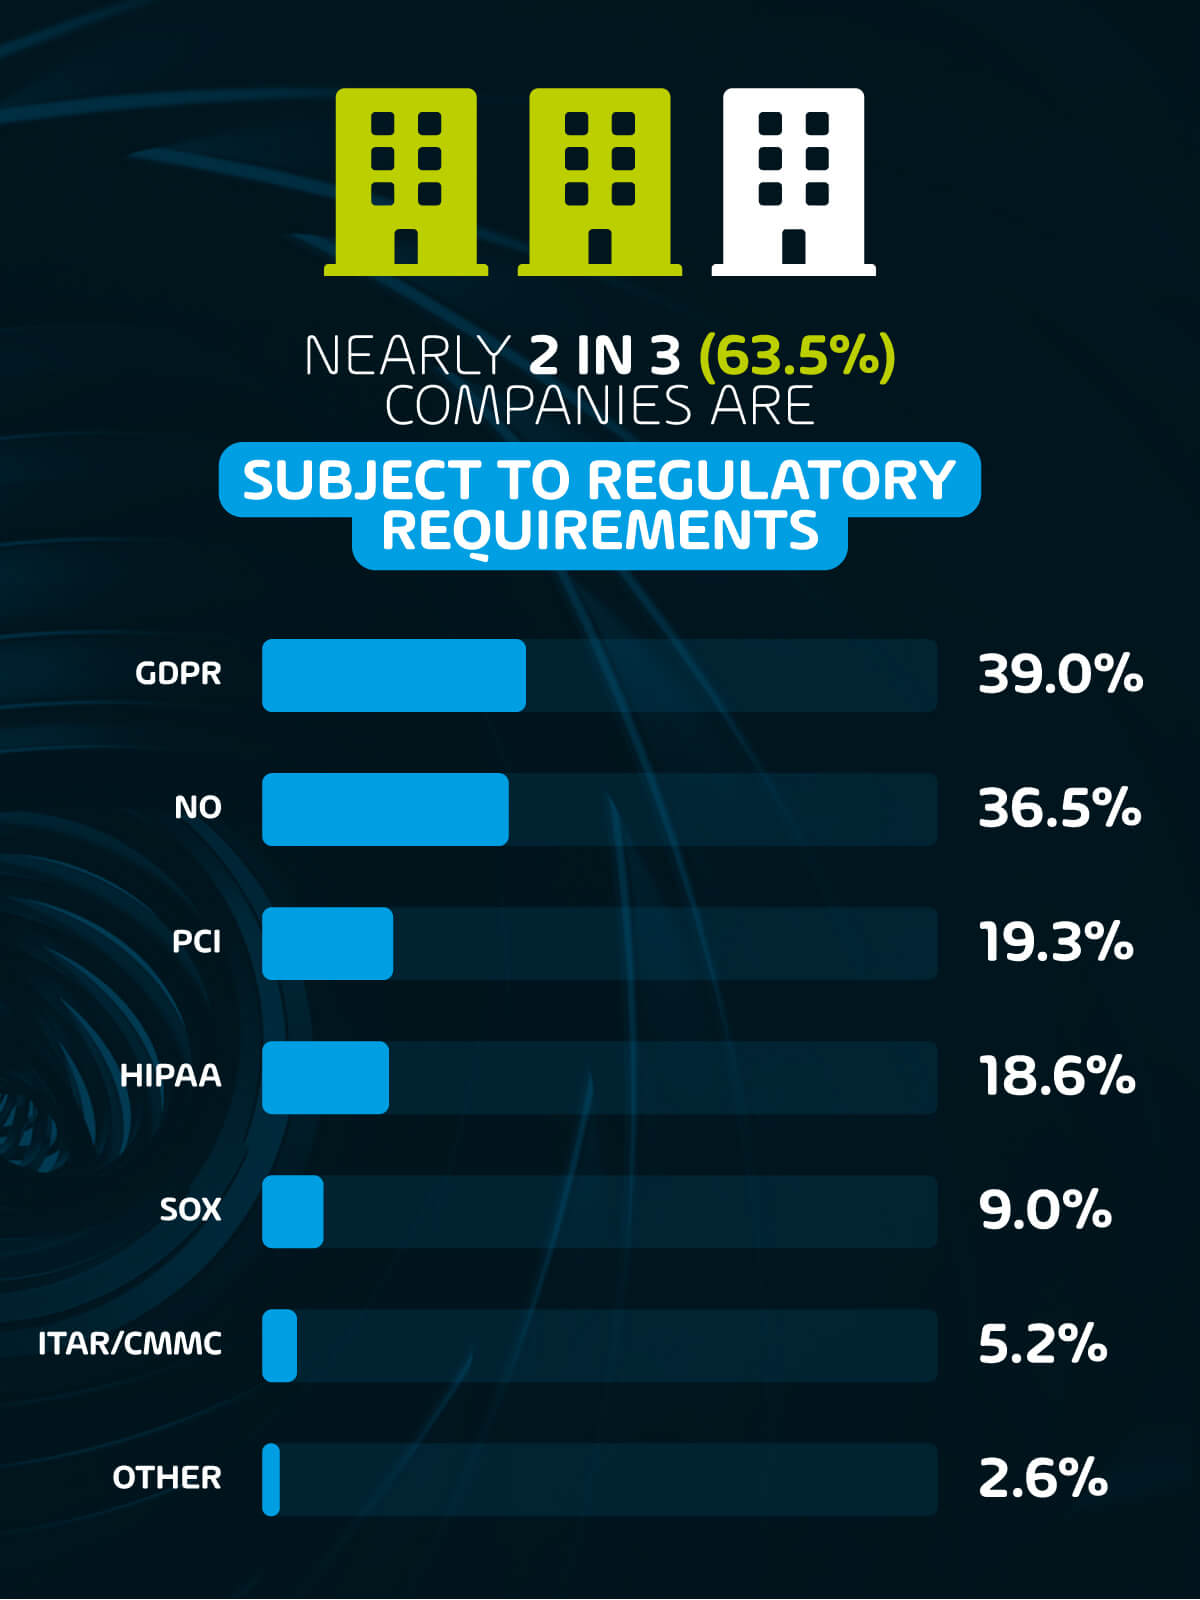 Nearly 2 in 3 (63.5%) organizations are subject to regulatory requirements